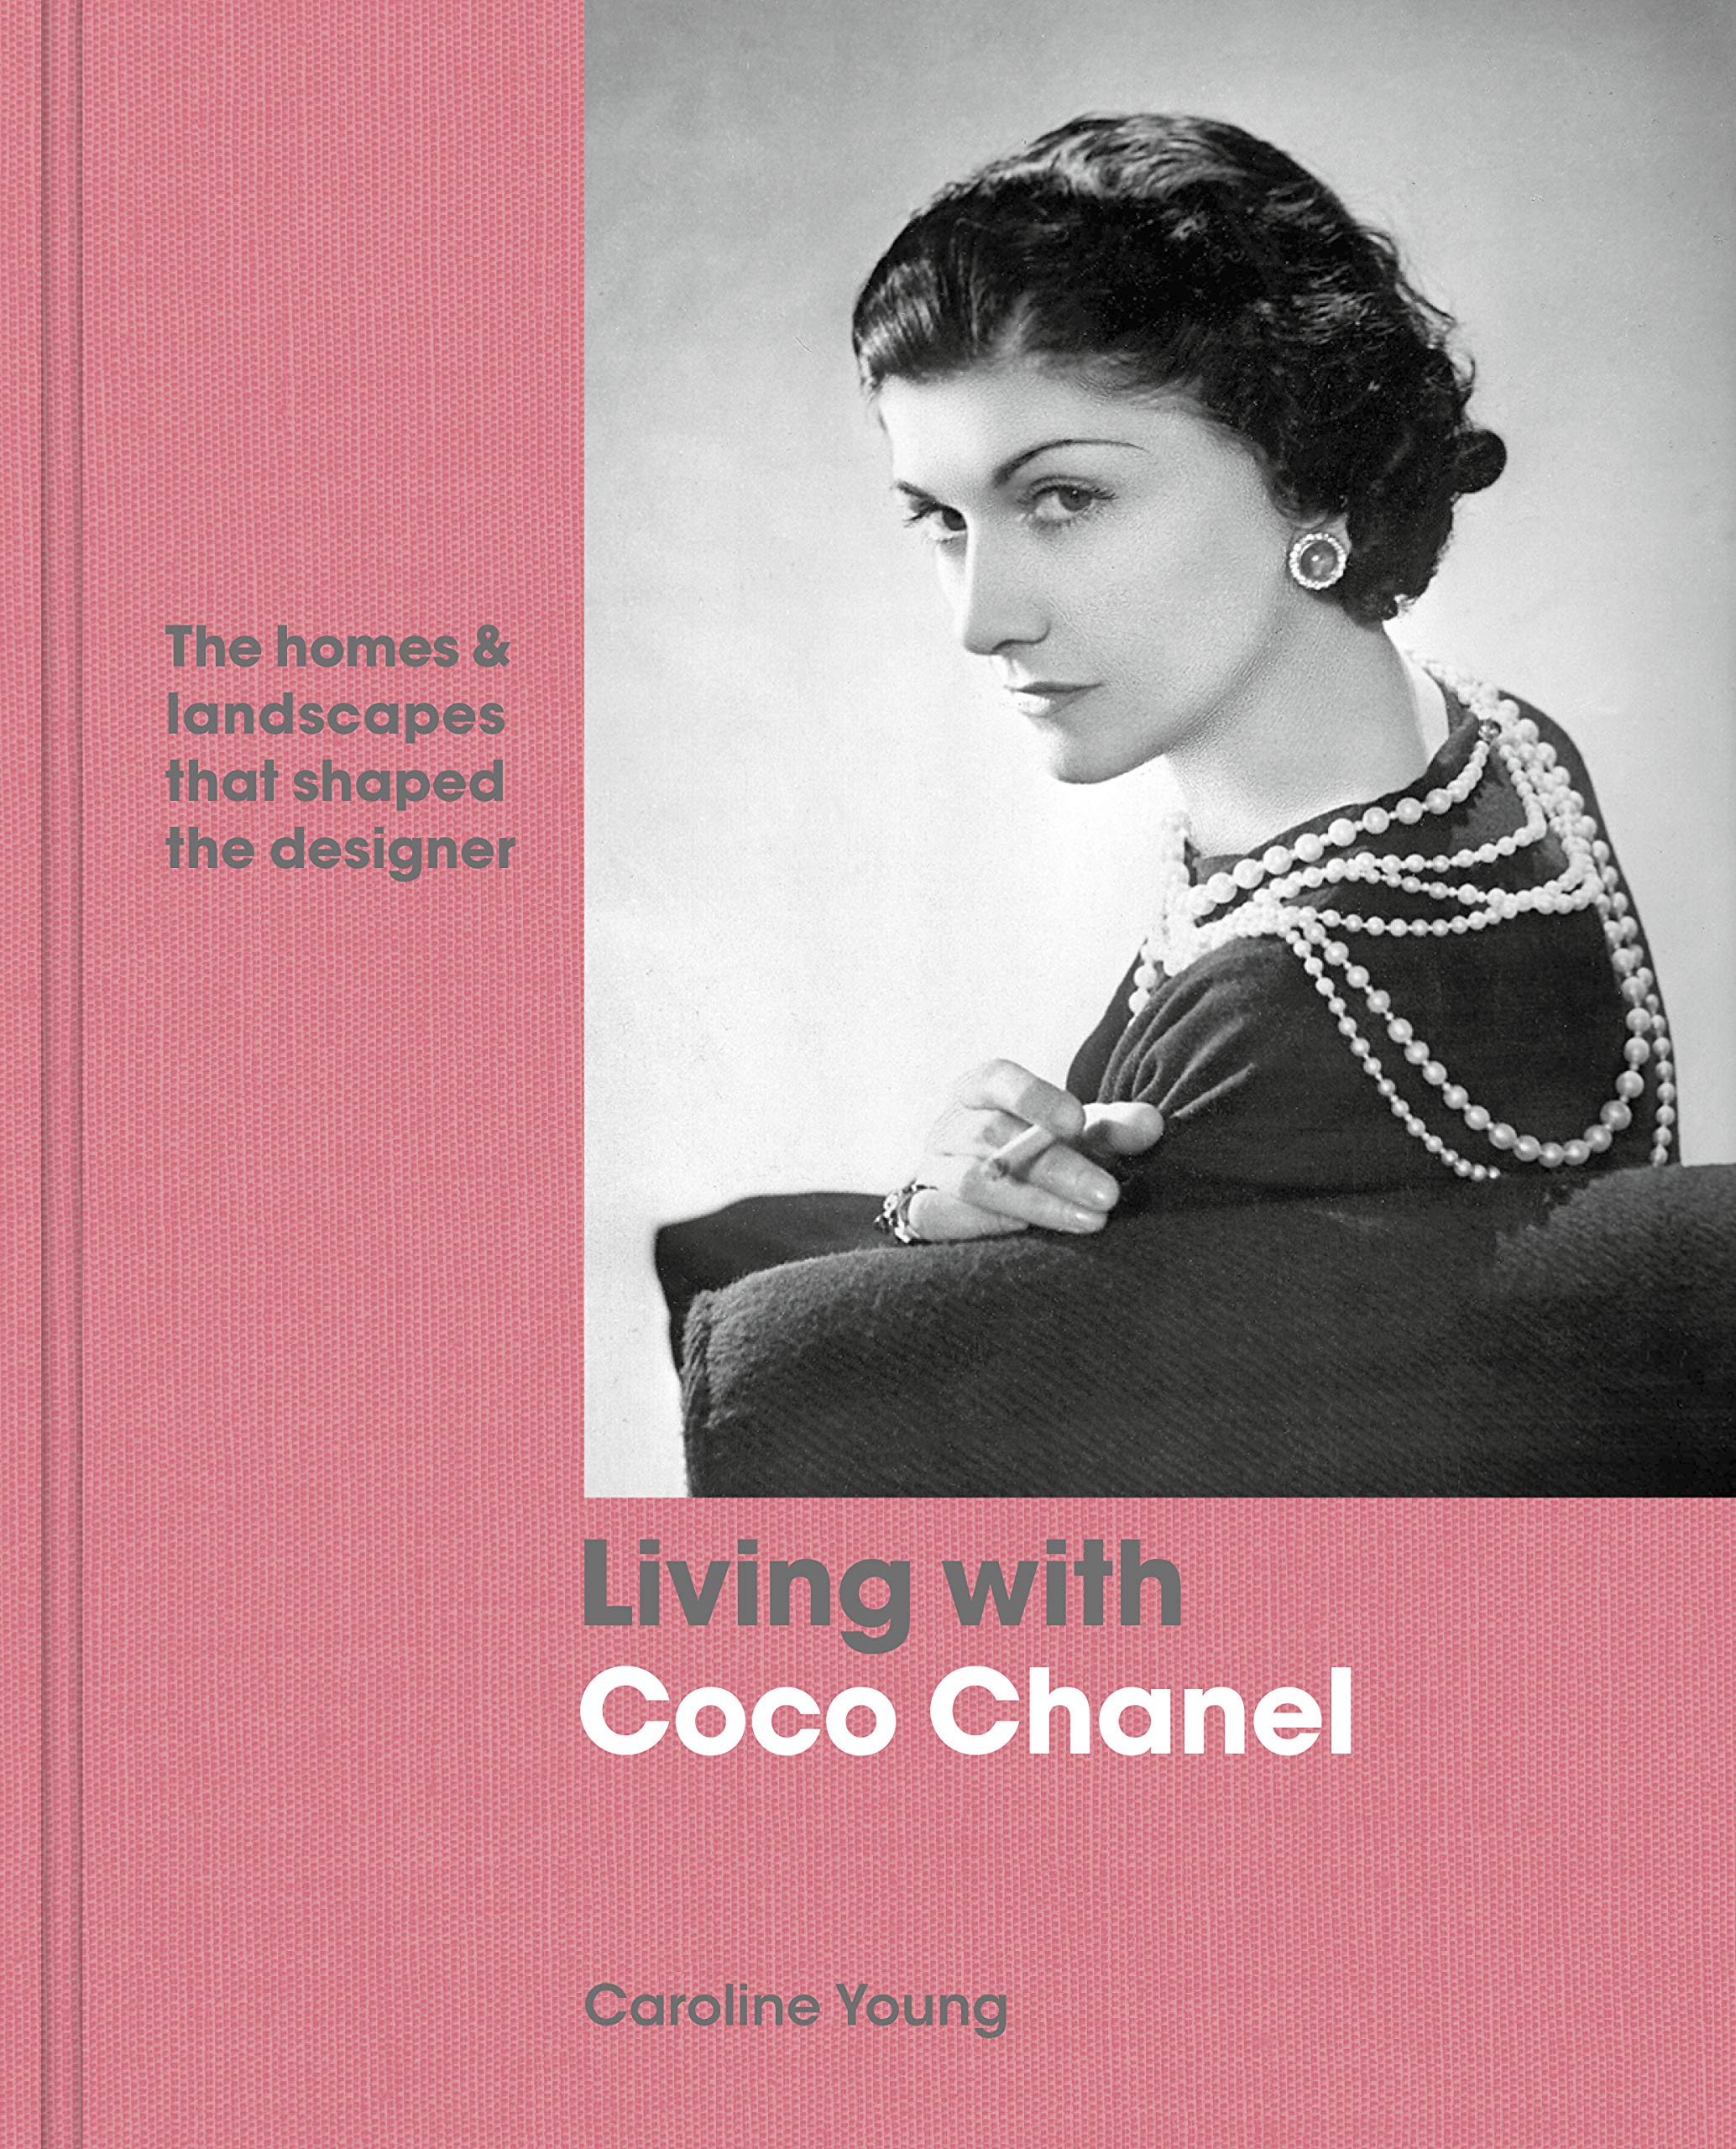 Channeling Coco Chanel: Life Lessons About Art, Fashion & Design!